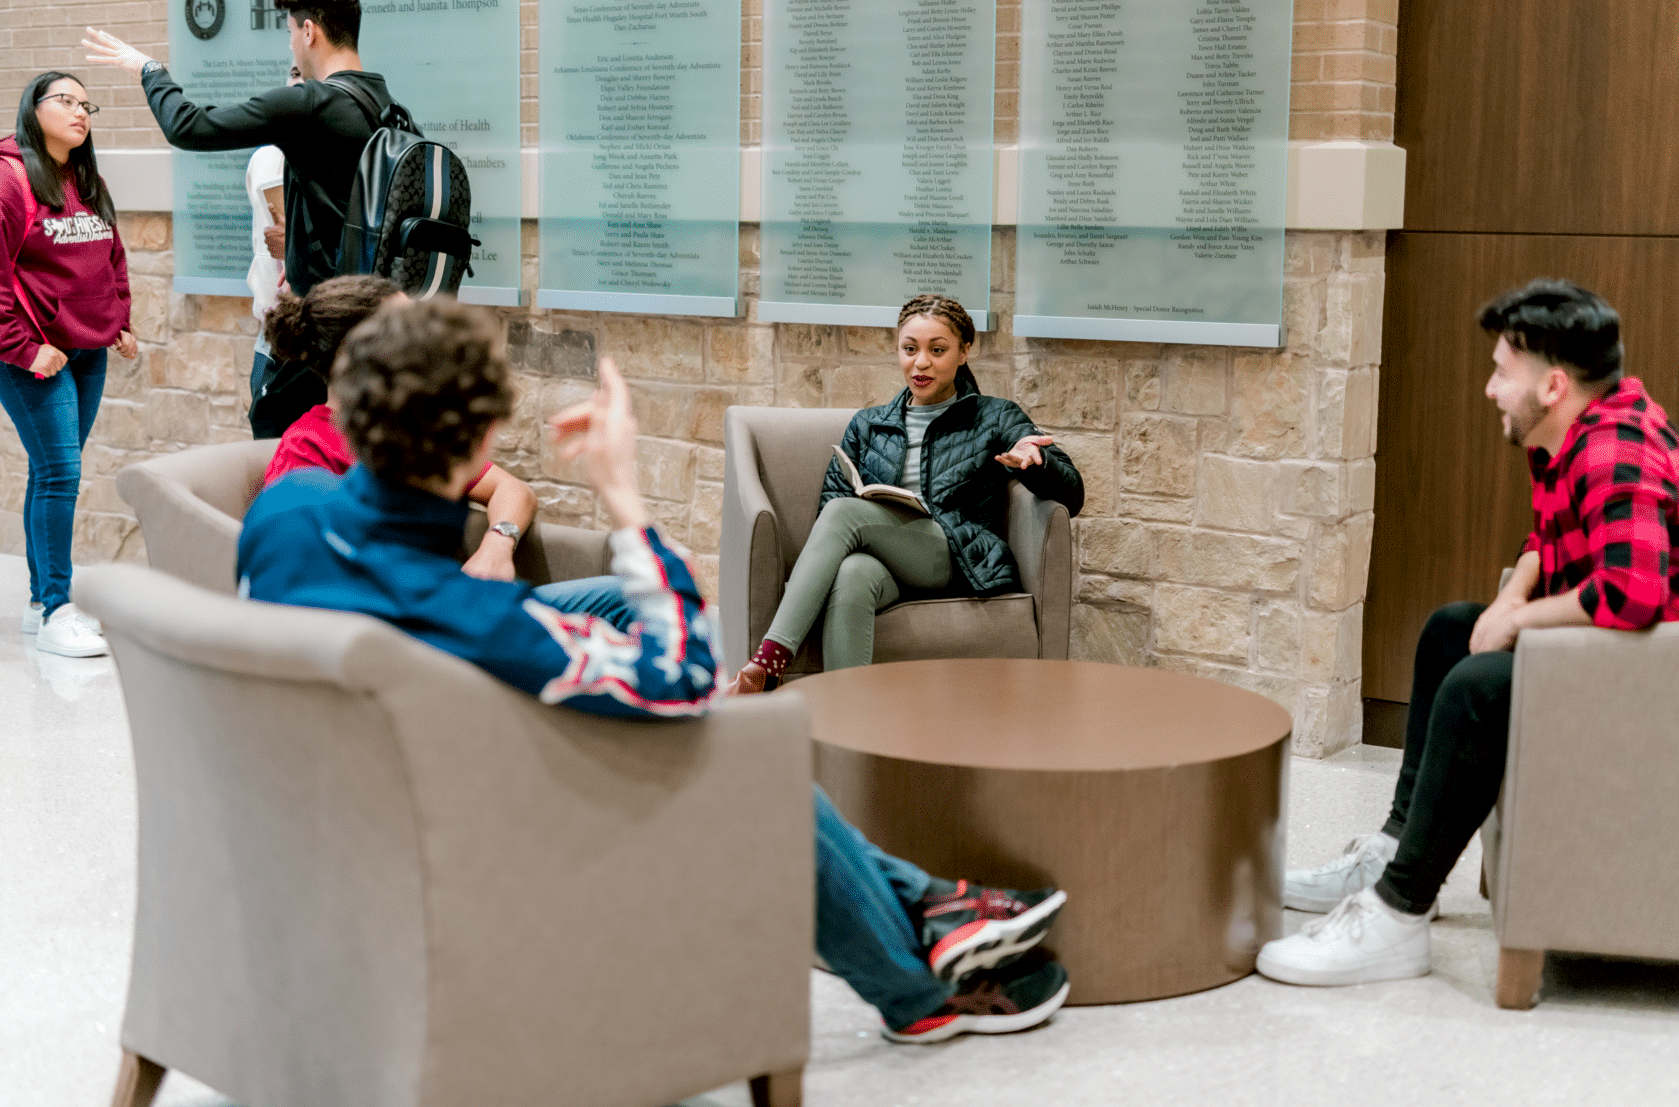 Four students sit in singular chairs and talk to each other across a brown coffee table.